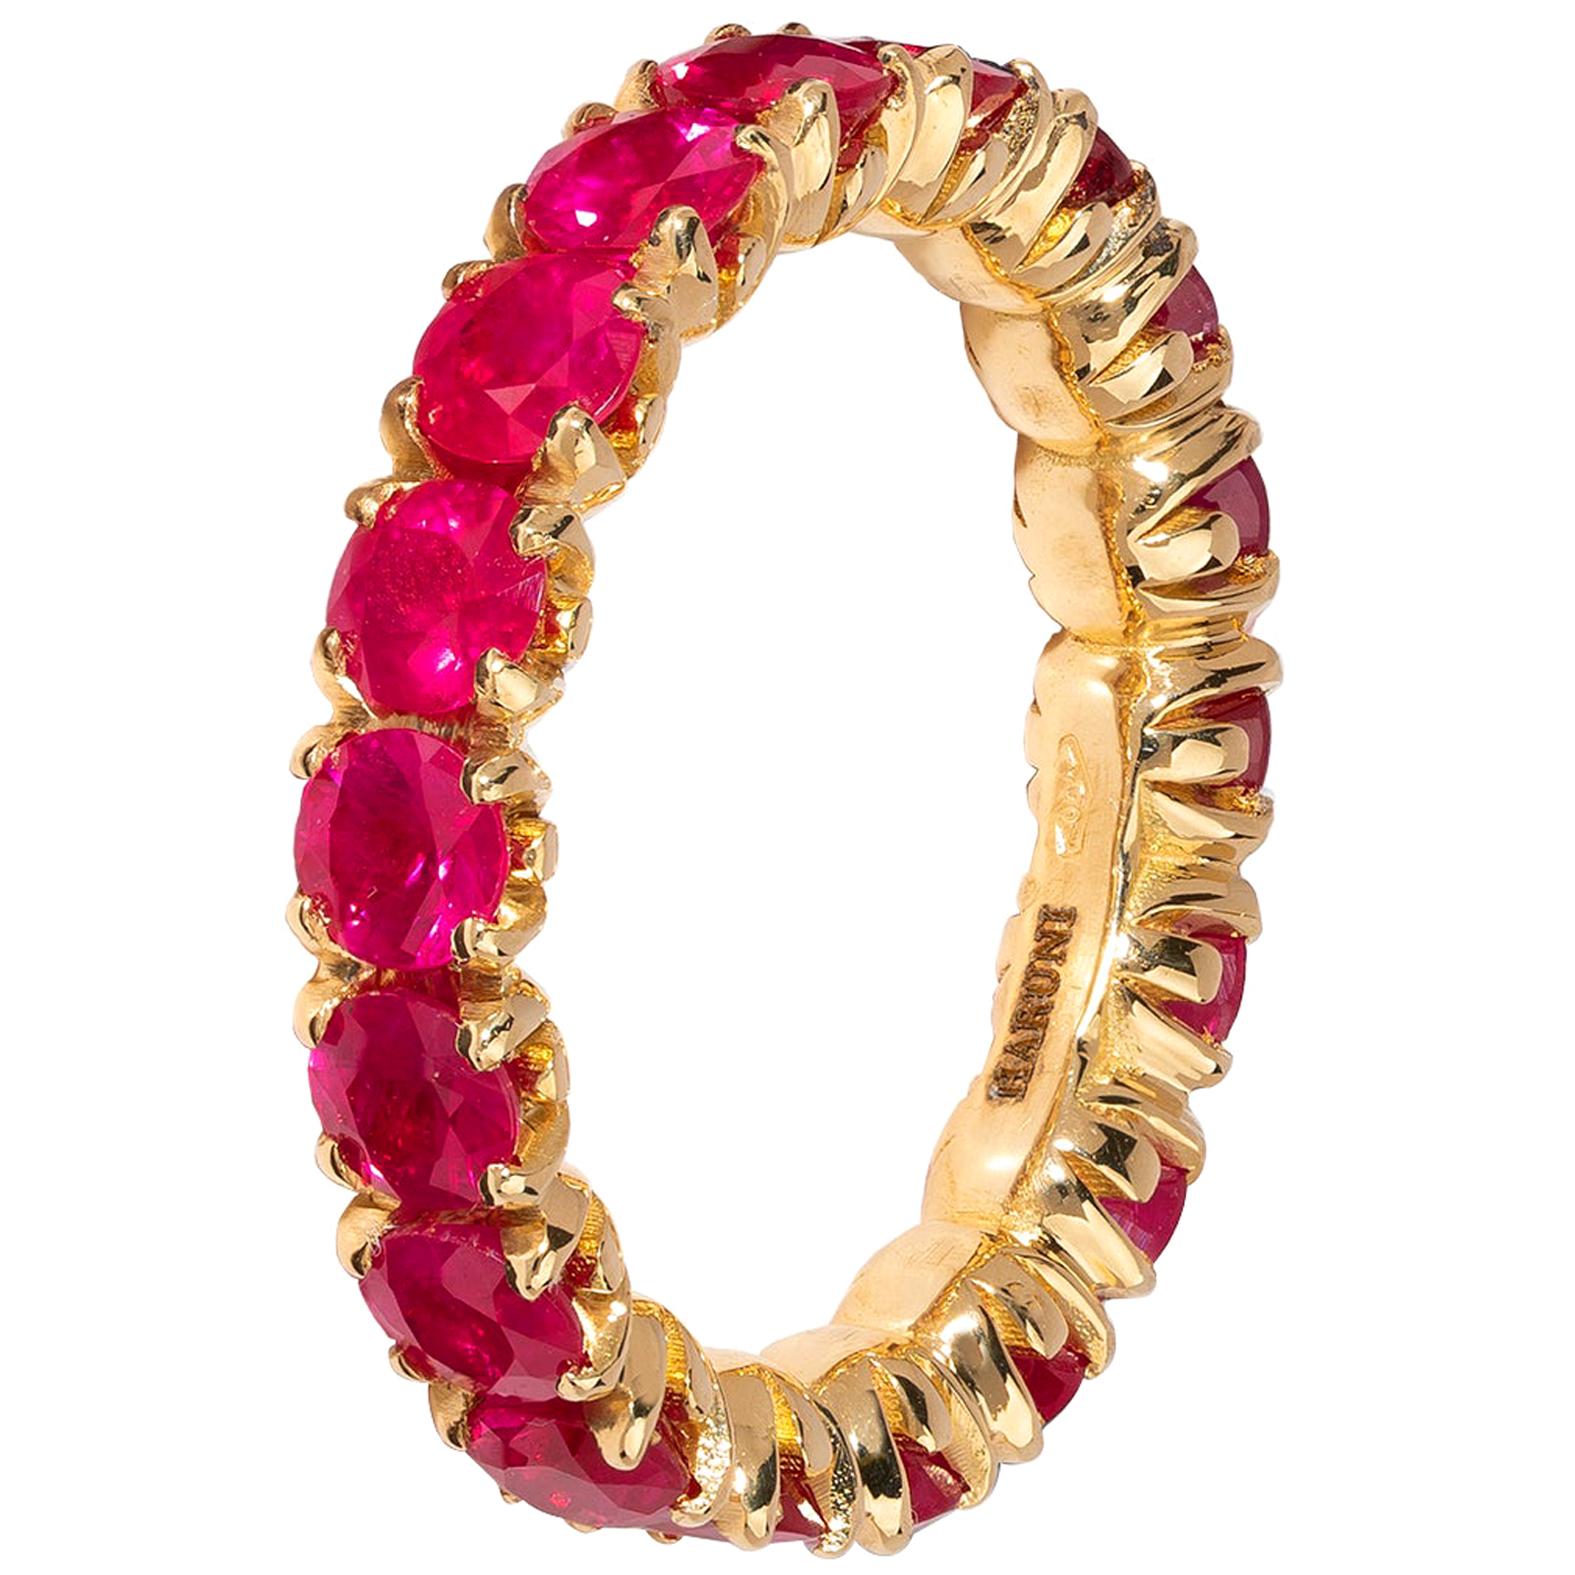 Eternity Ring with Rubies in 18 Karat Yellow Gold